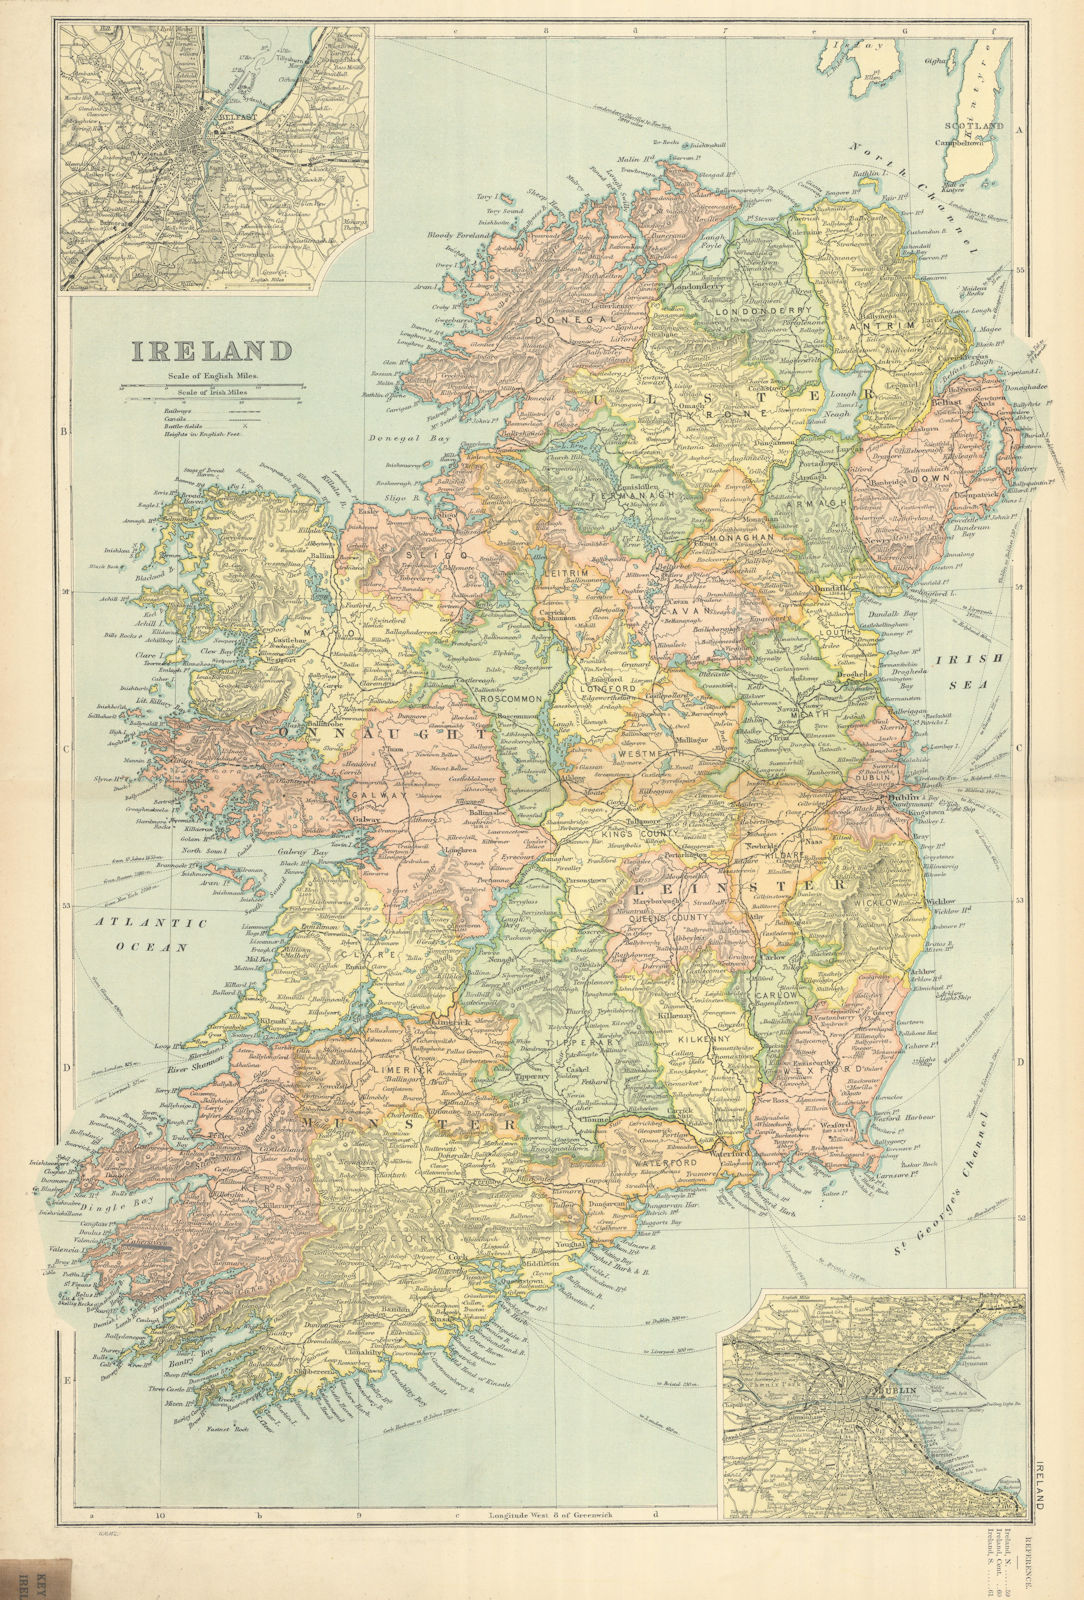 Associate Product IRELAND in counties. Dublin inset. Antique map by GW BACON 1898 old